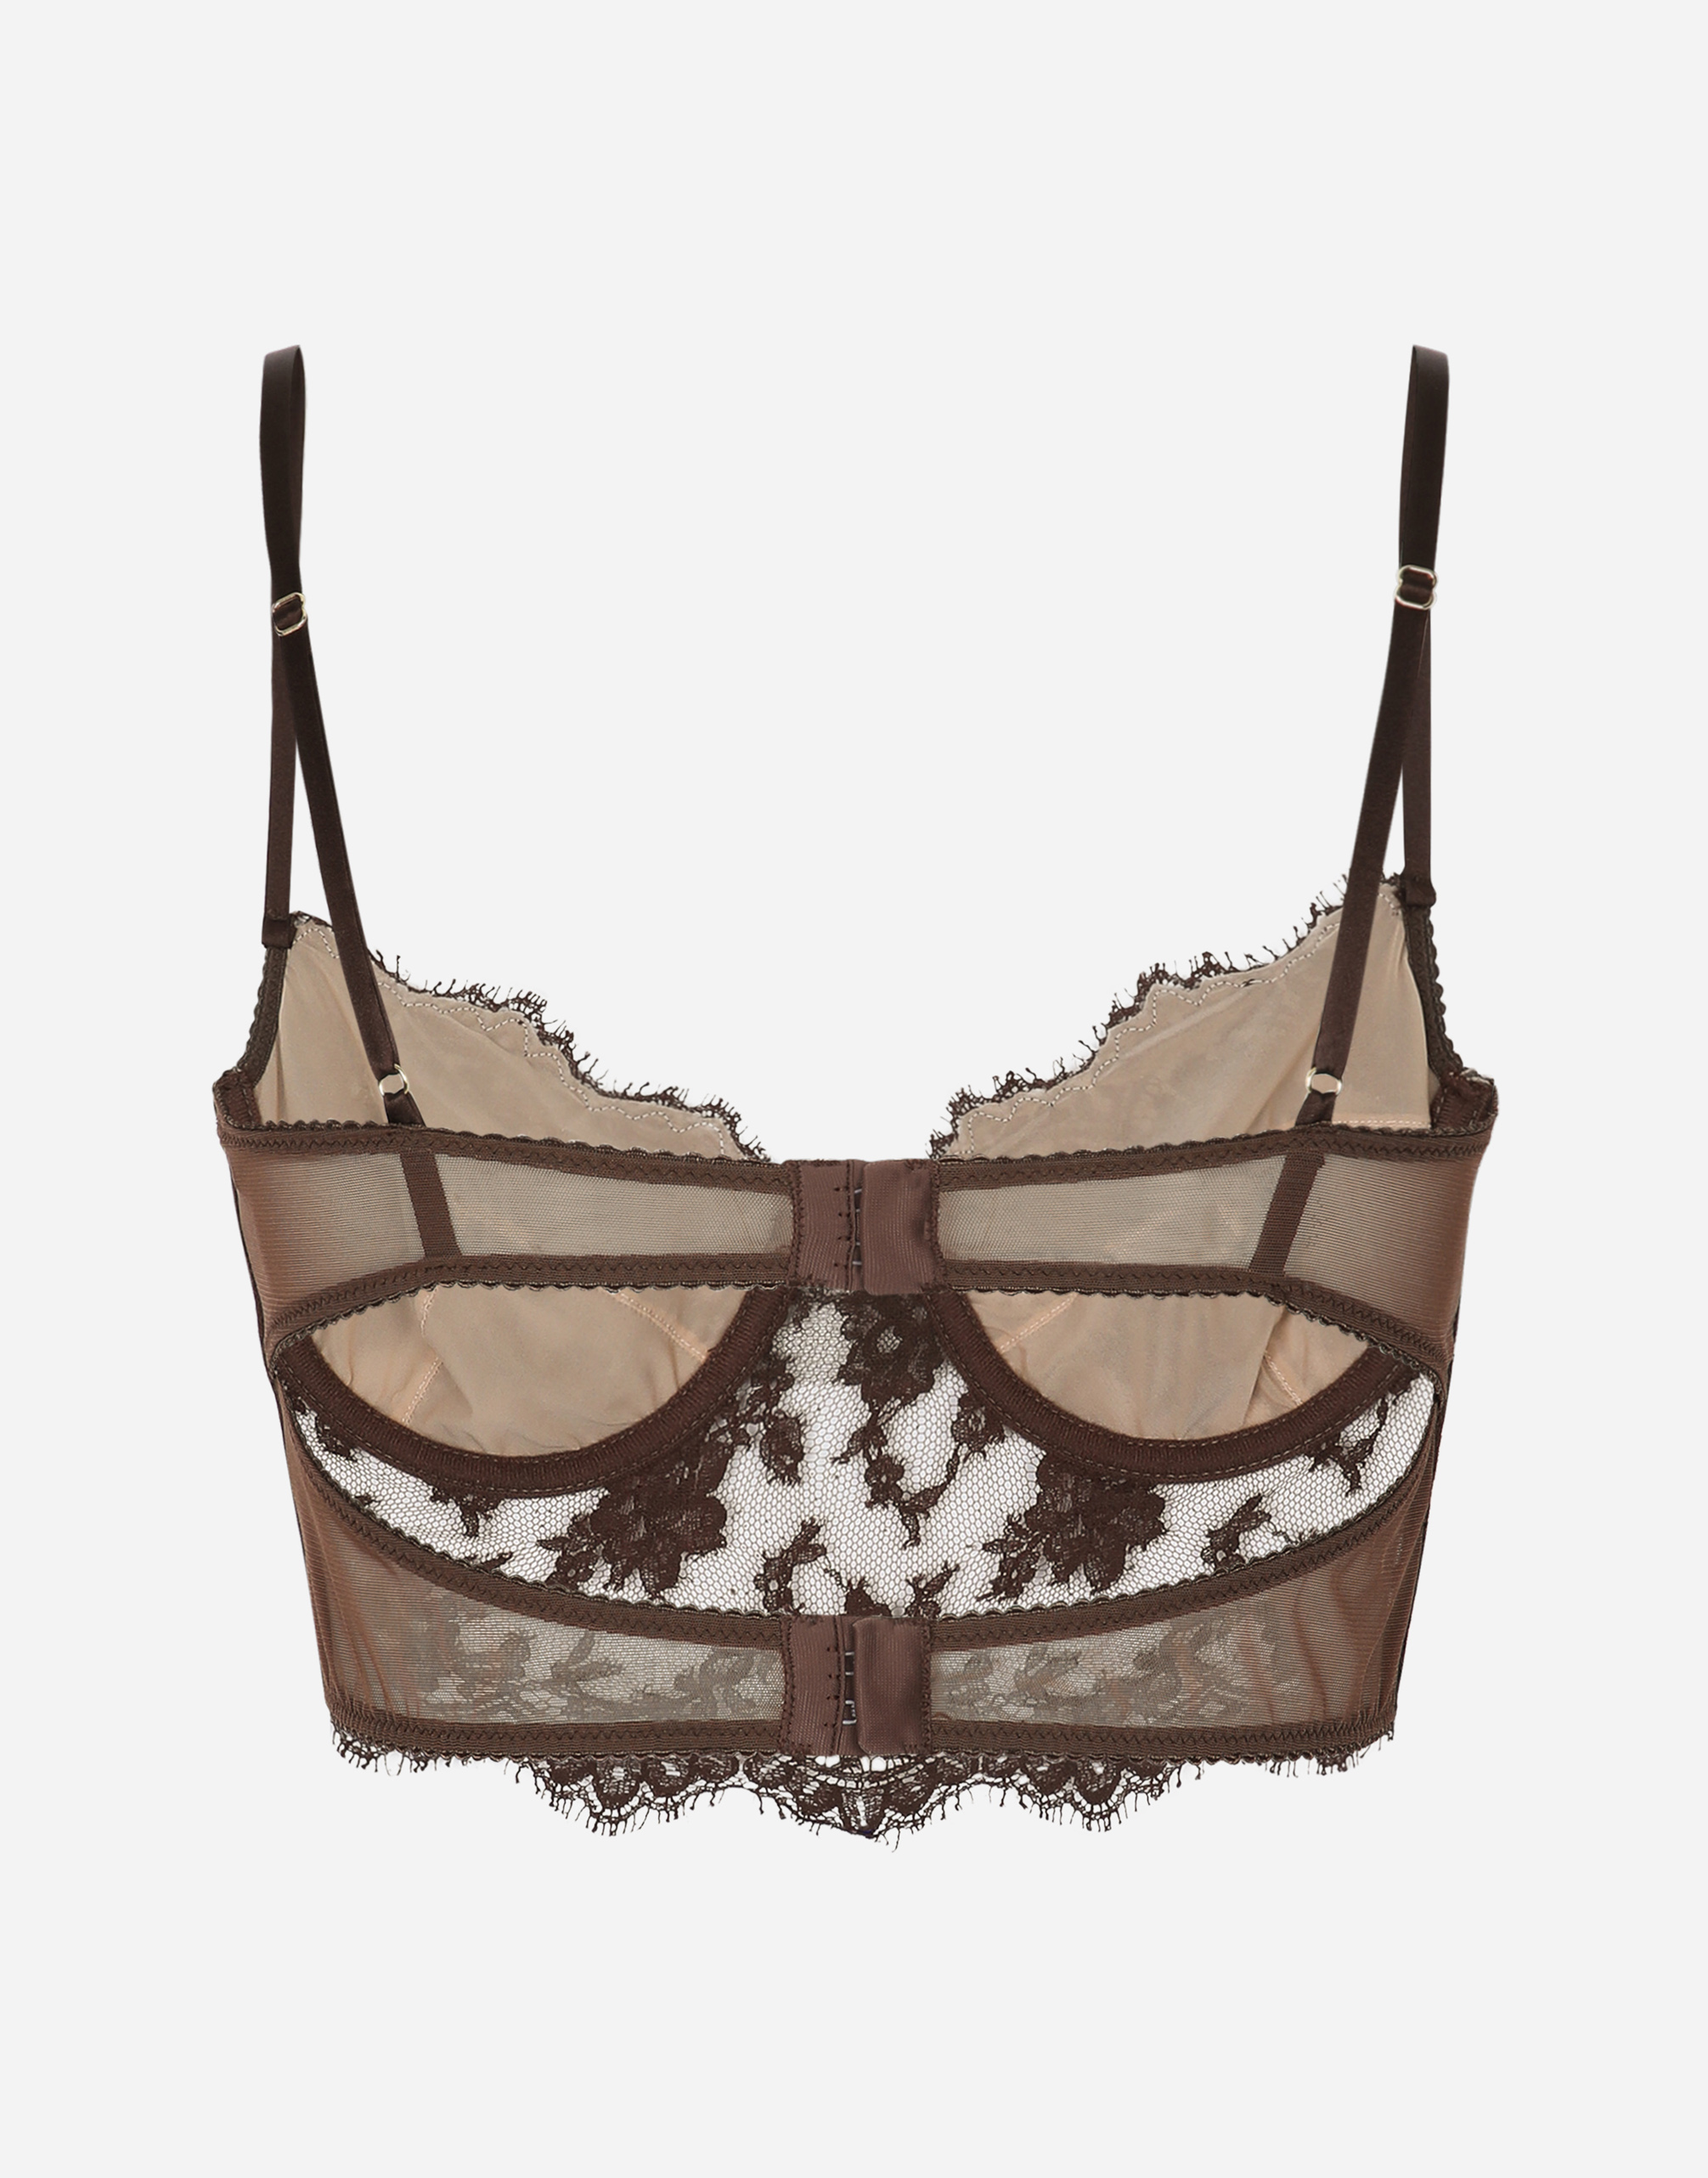 Lace lingerie top in Brown for for Women